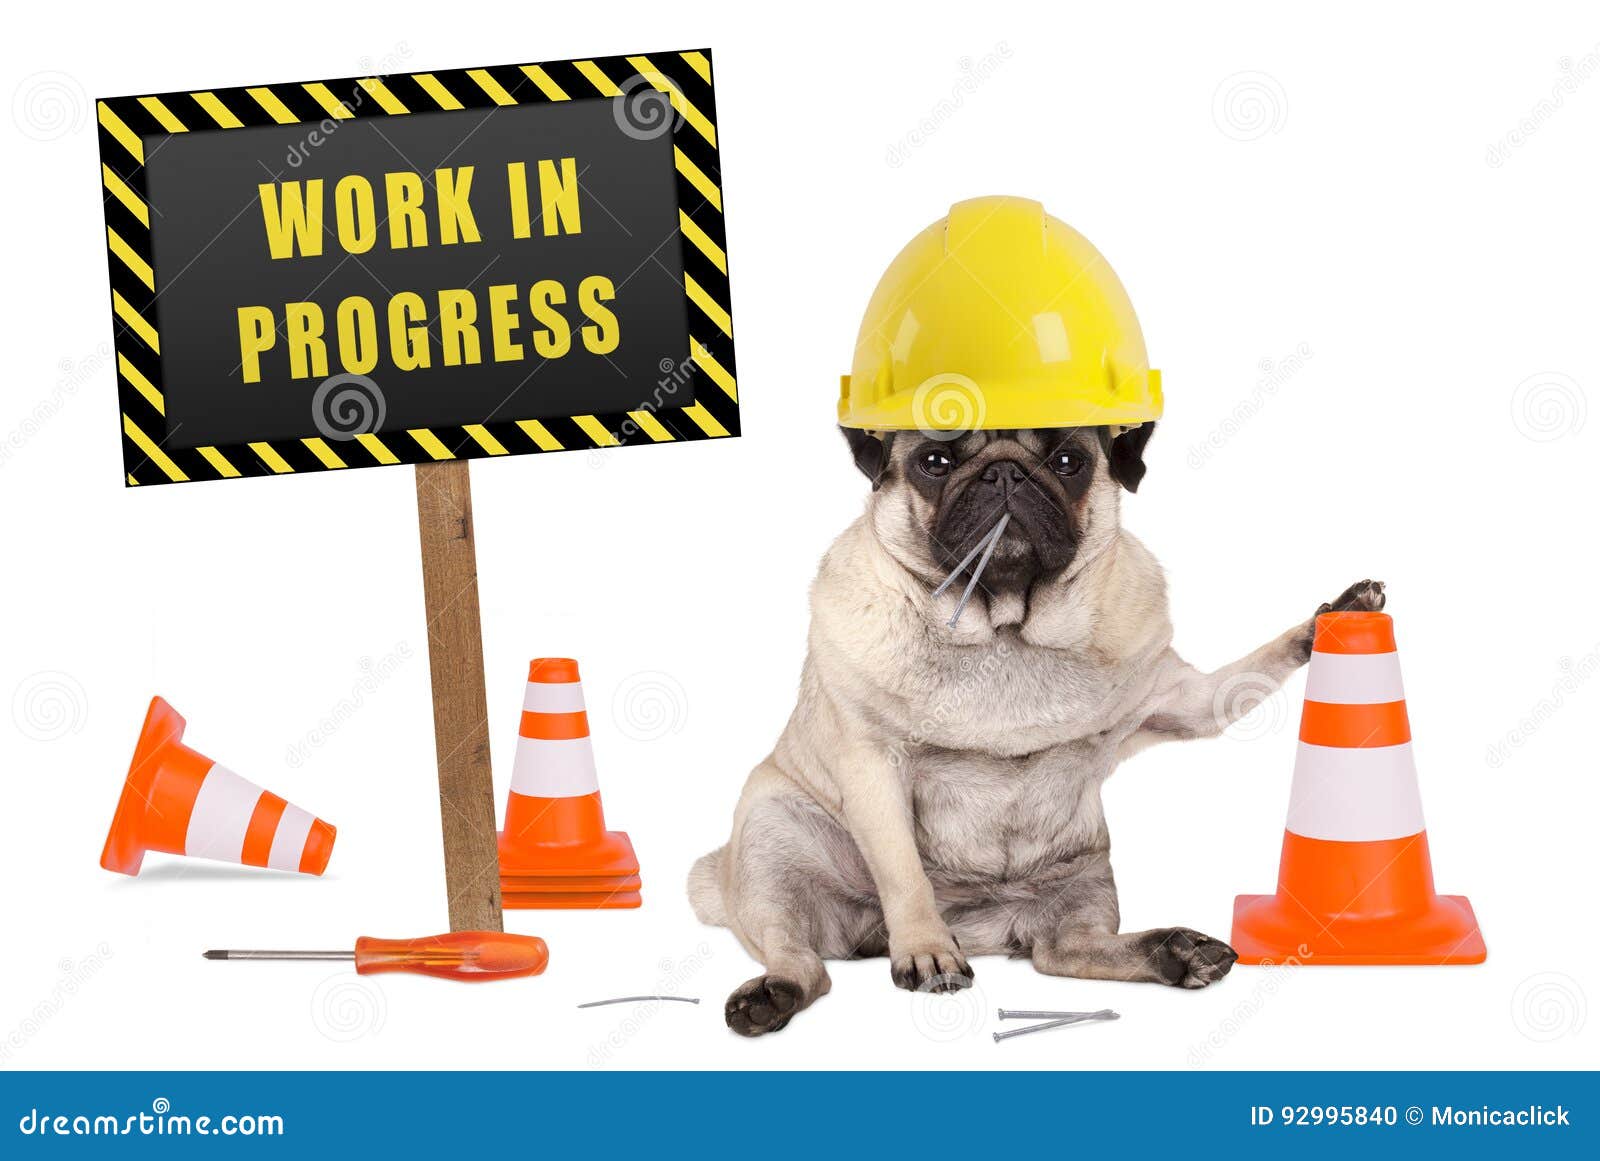 pug dog with constructor safety helmet and yellow and black work in progress sign on wooden pole